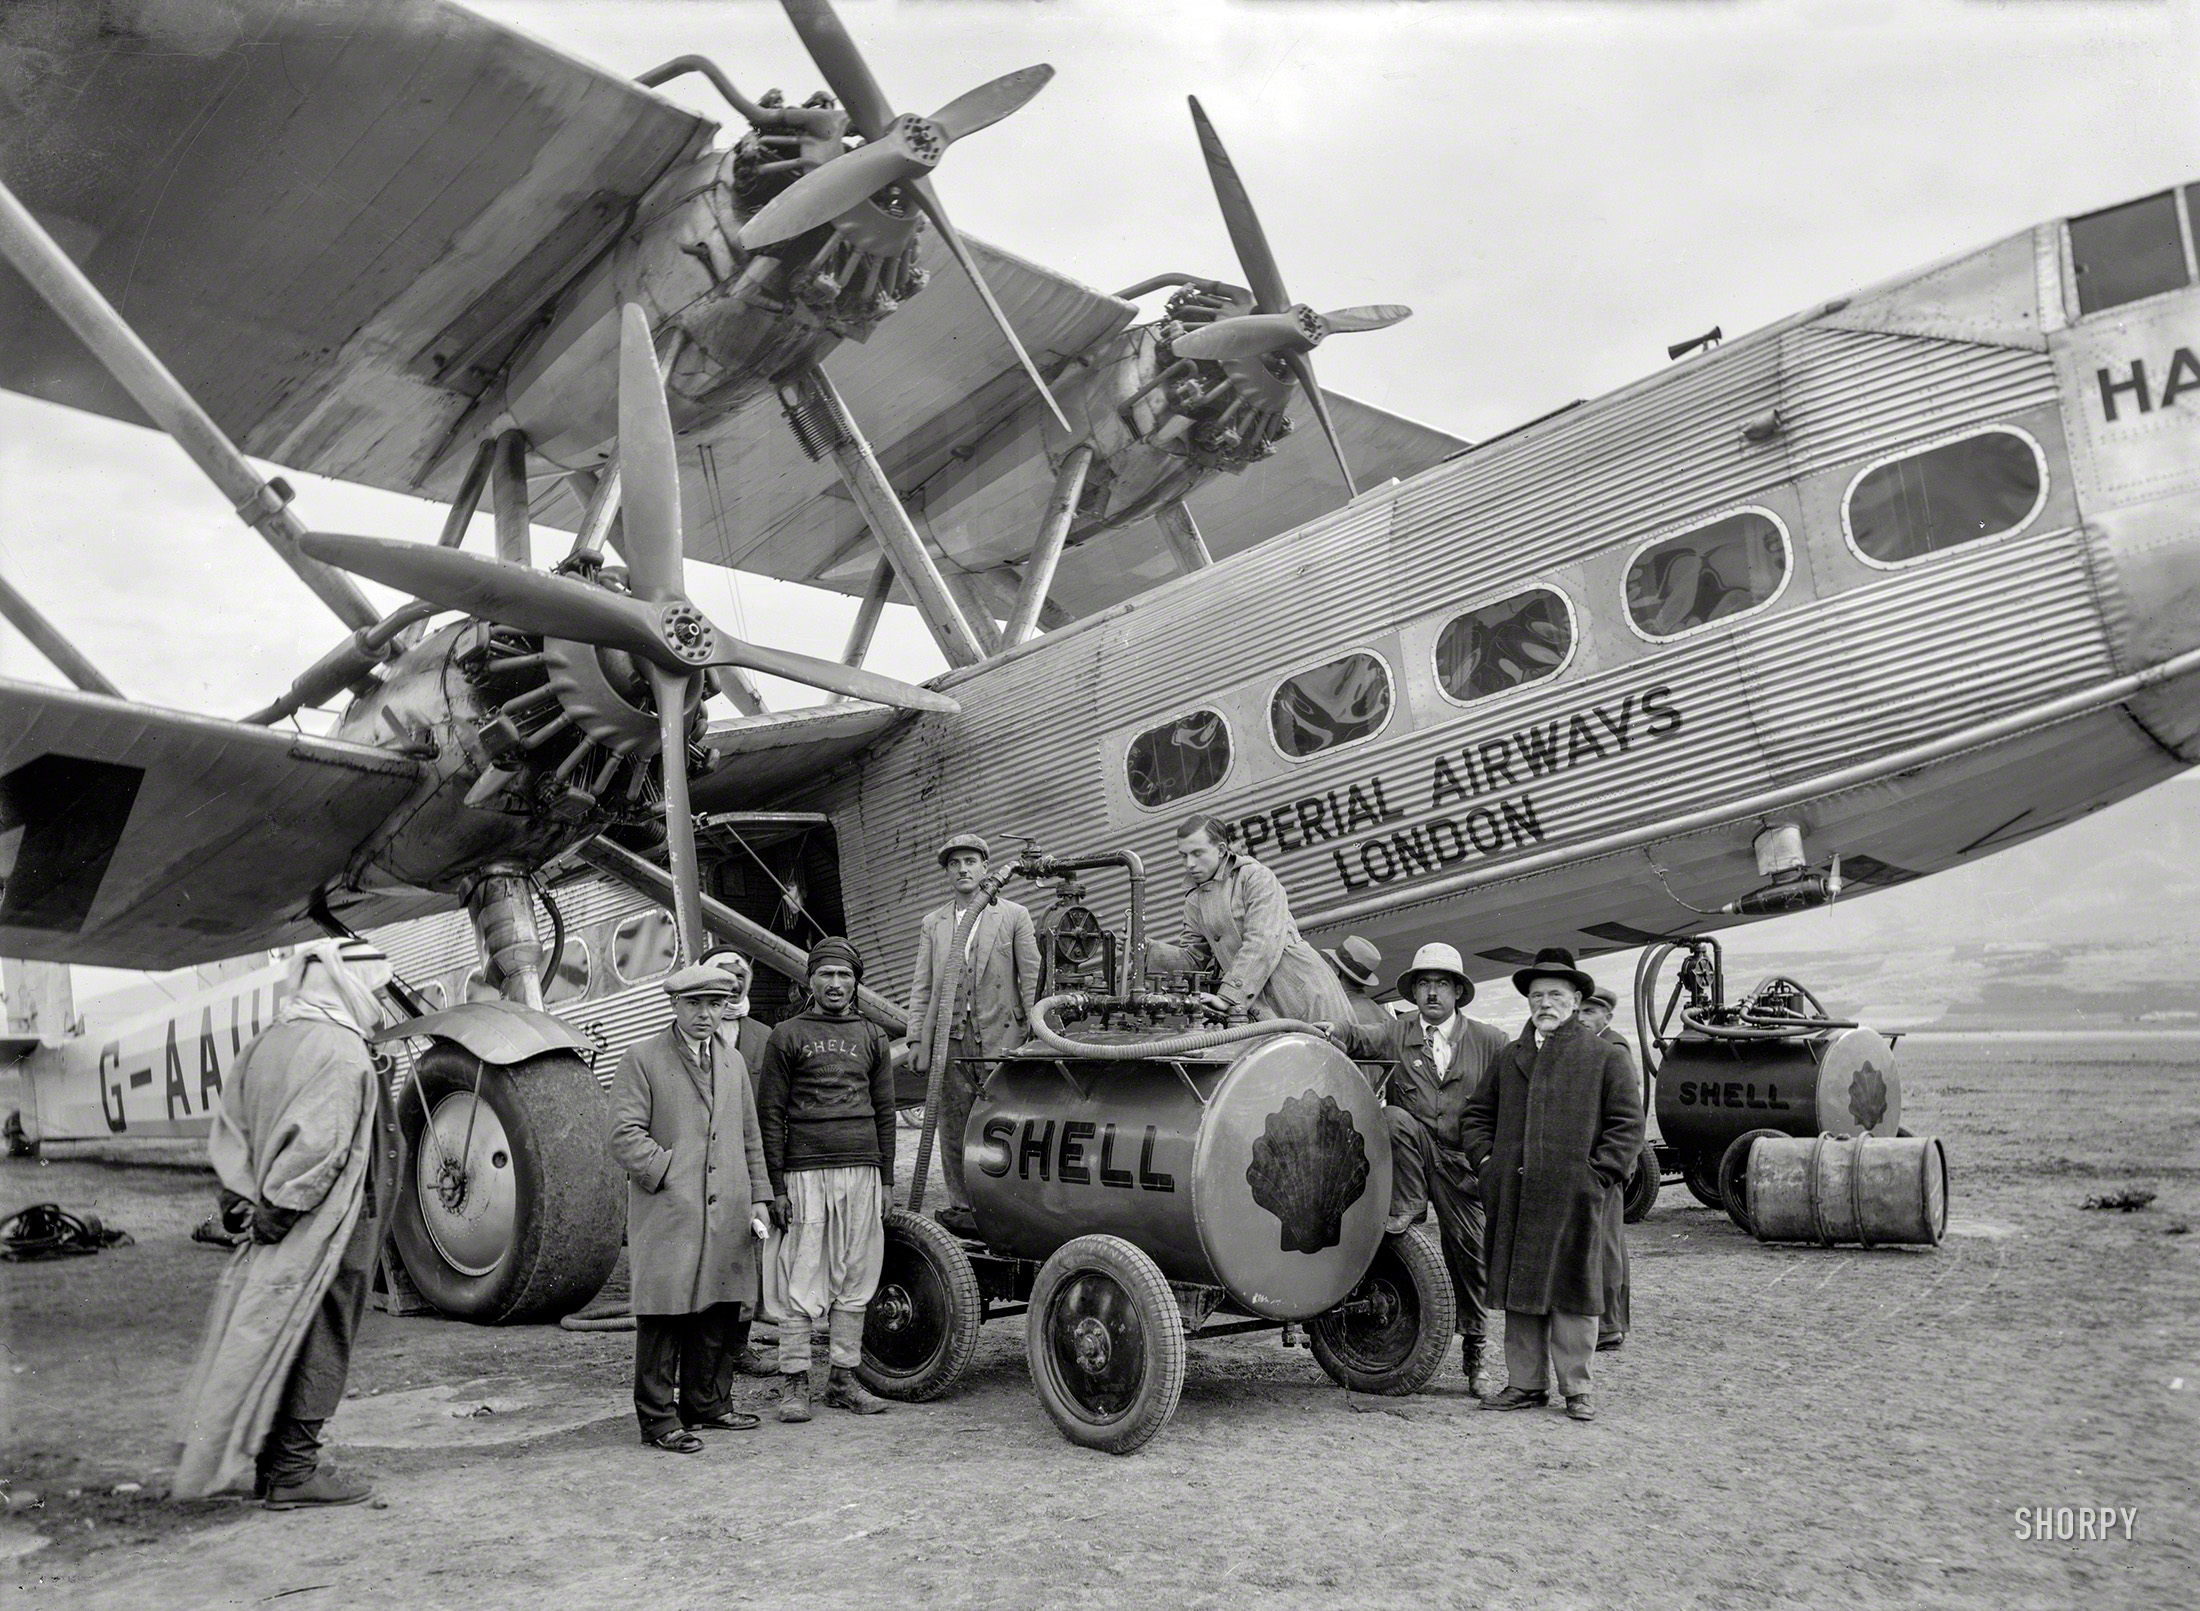 October 1931. "Imperial Airways aircraft refueling at Semakh, British Mandate Palestine." 5x7 glass negative, Matson Photo Service. View full size.